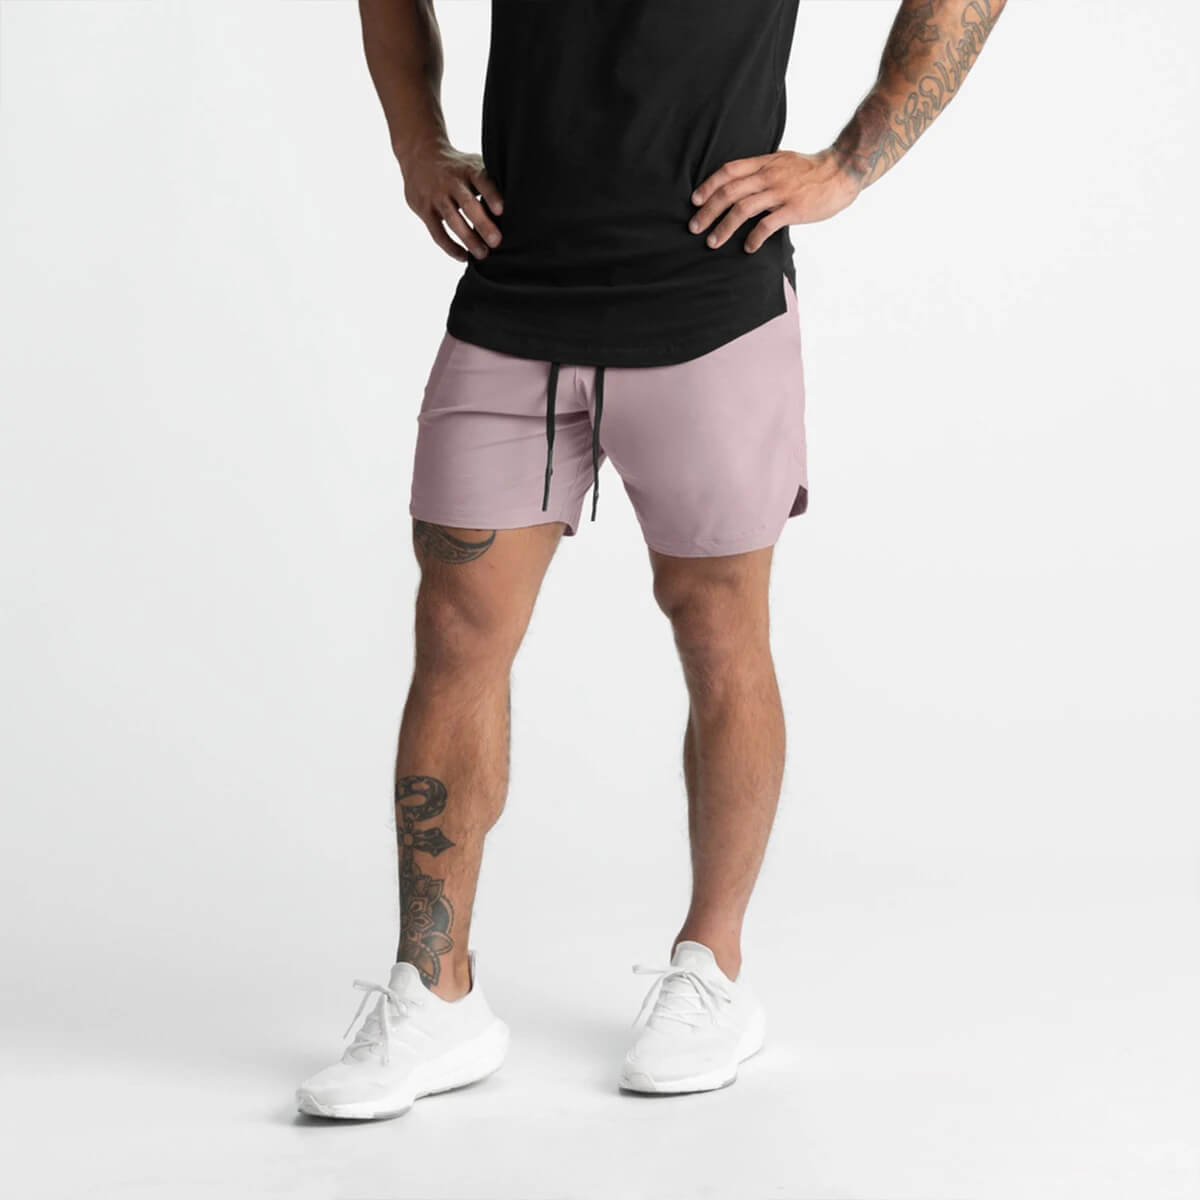 Men's 17'' outside length workout shorts without liner (🔥Buy 1 Get 1 Free)